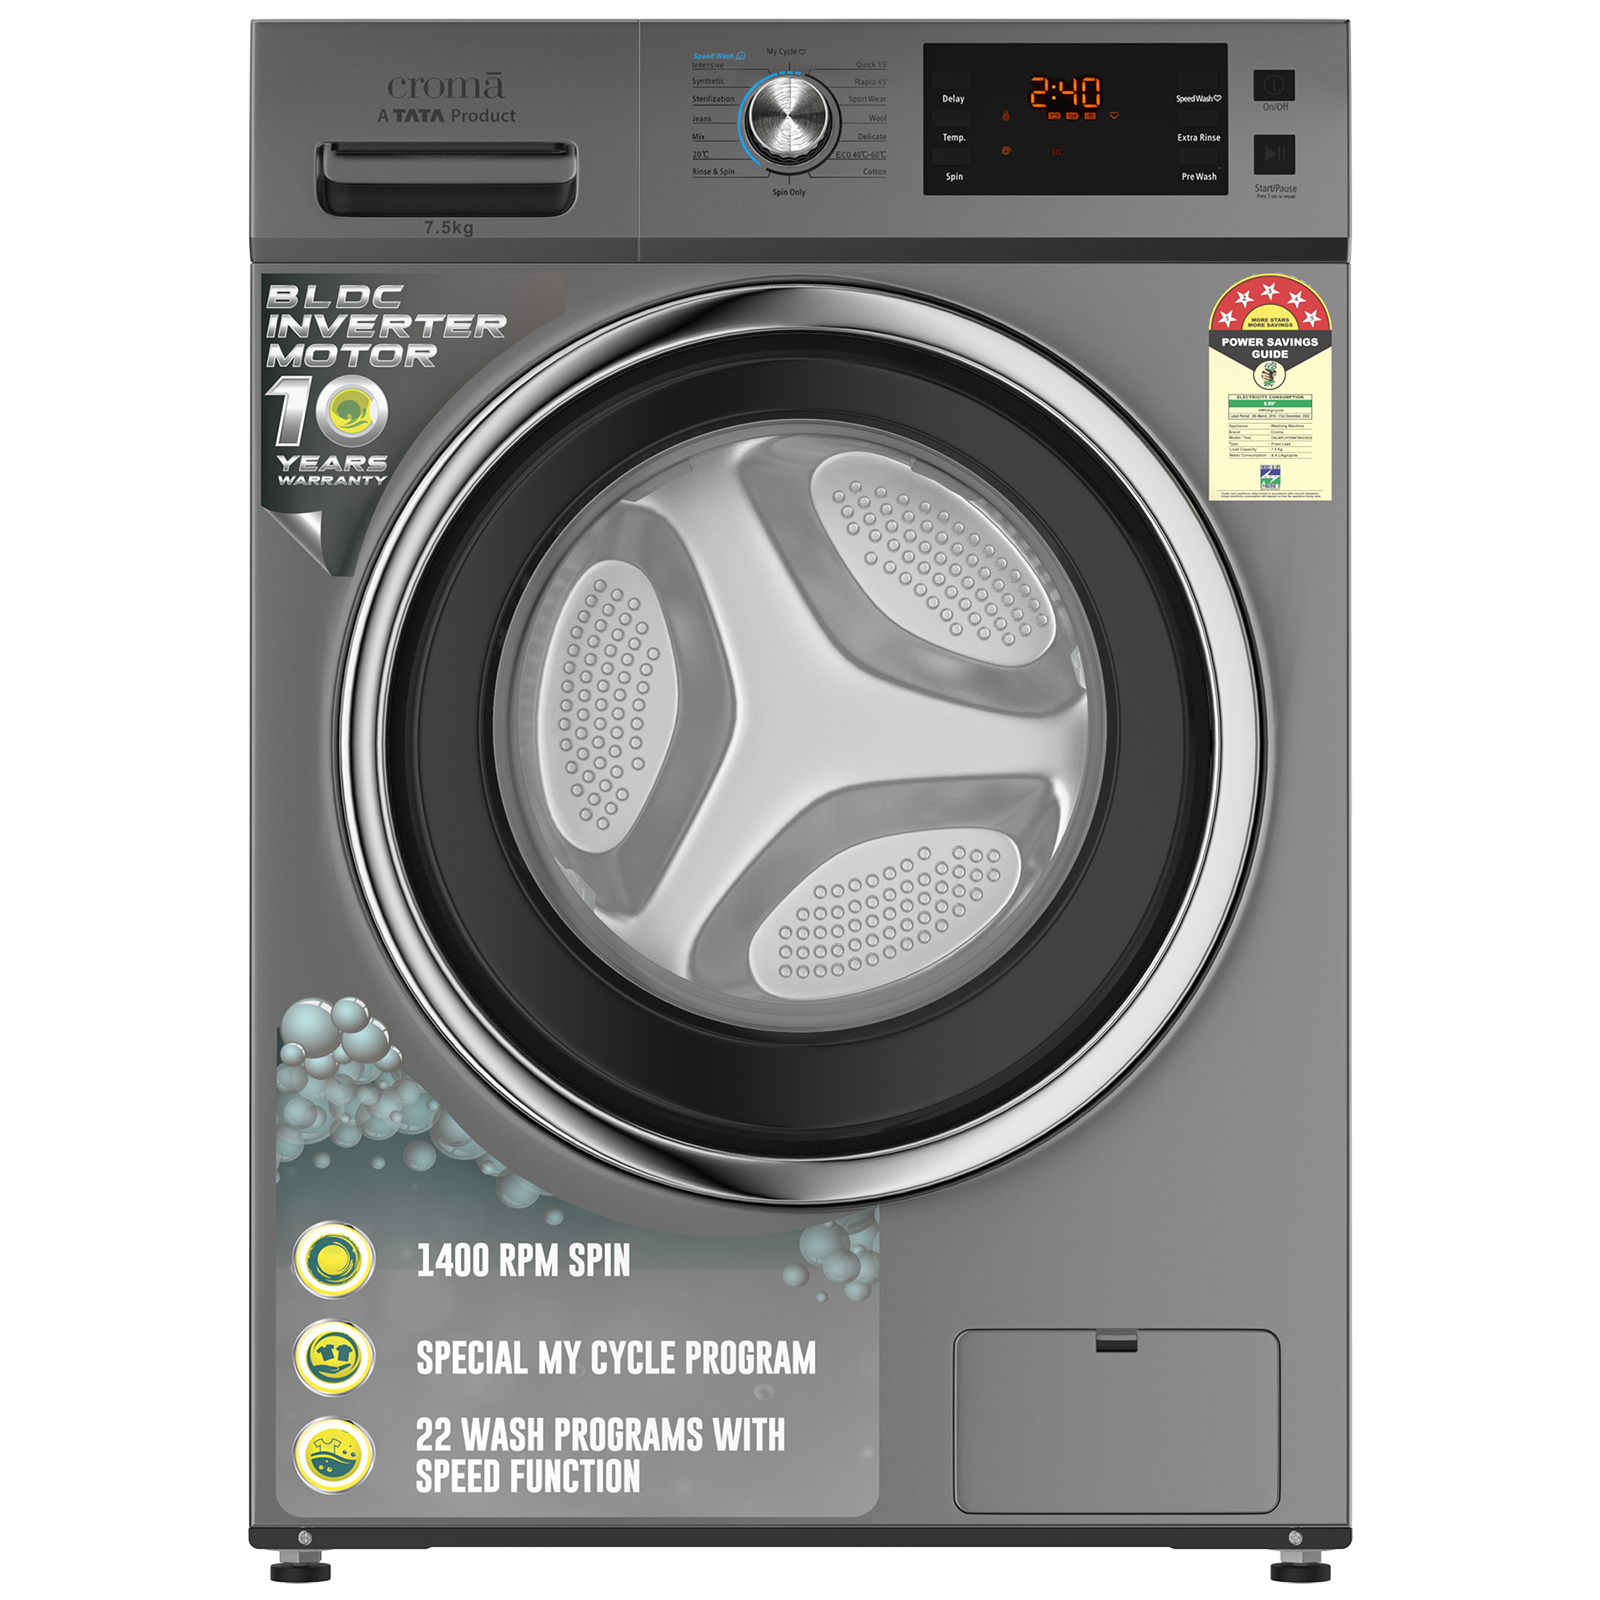 Buy Whirlpool 7.5 kg Fully Automatic Top Load Washing Machine (WhiteMagic  Premier, 31599, Spiro Wash Action, Grey) Online - Croma